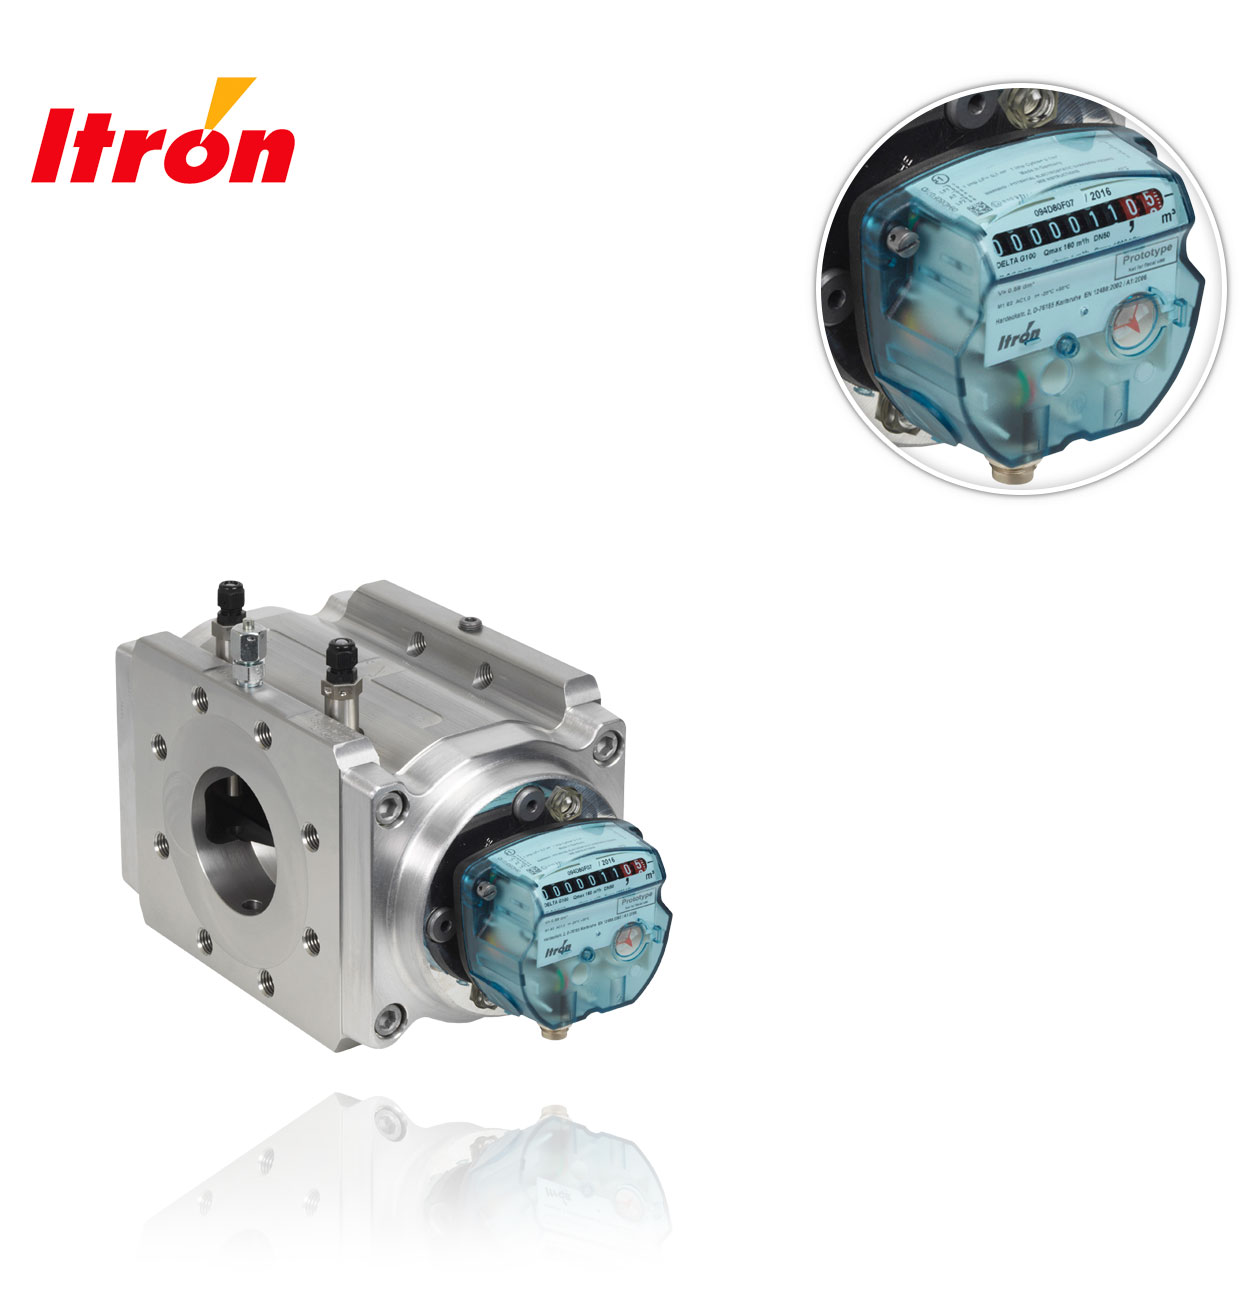 DELTA G16 DN50 maximum qty:40 DYNAMIC:50 LENGTH:171mm ITRON EXTENDED DYNAMIC ROTARY PISTON METER